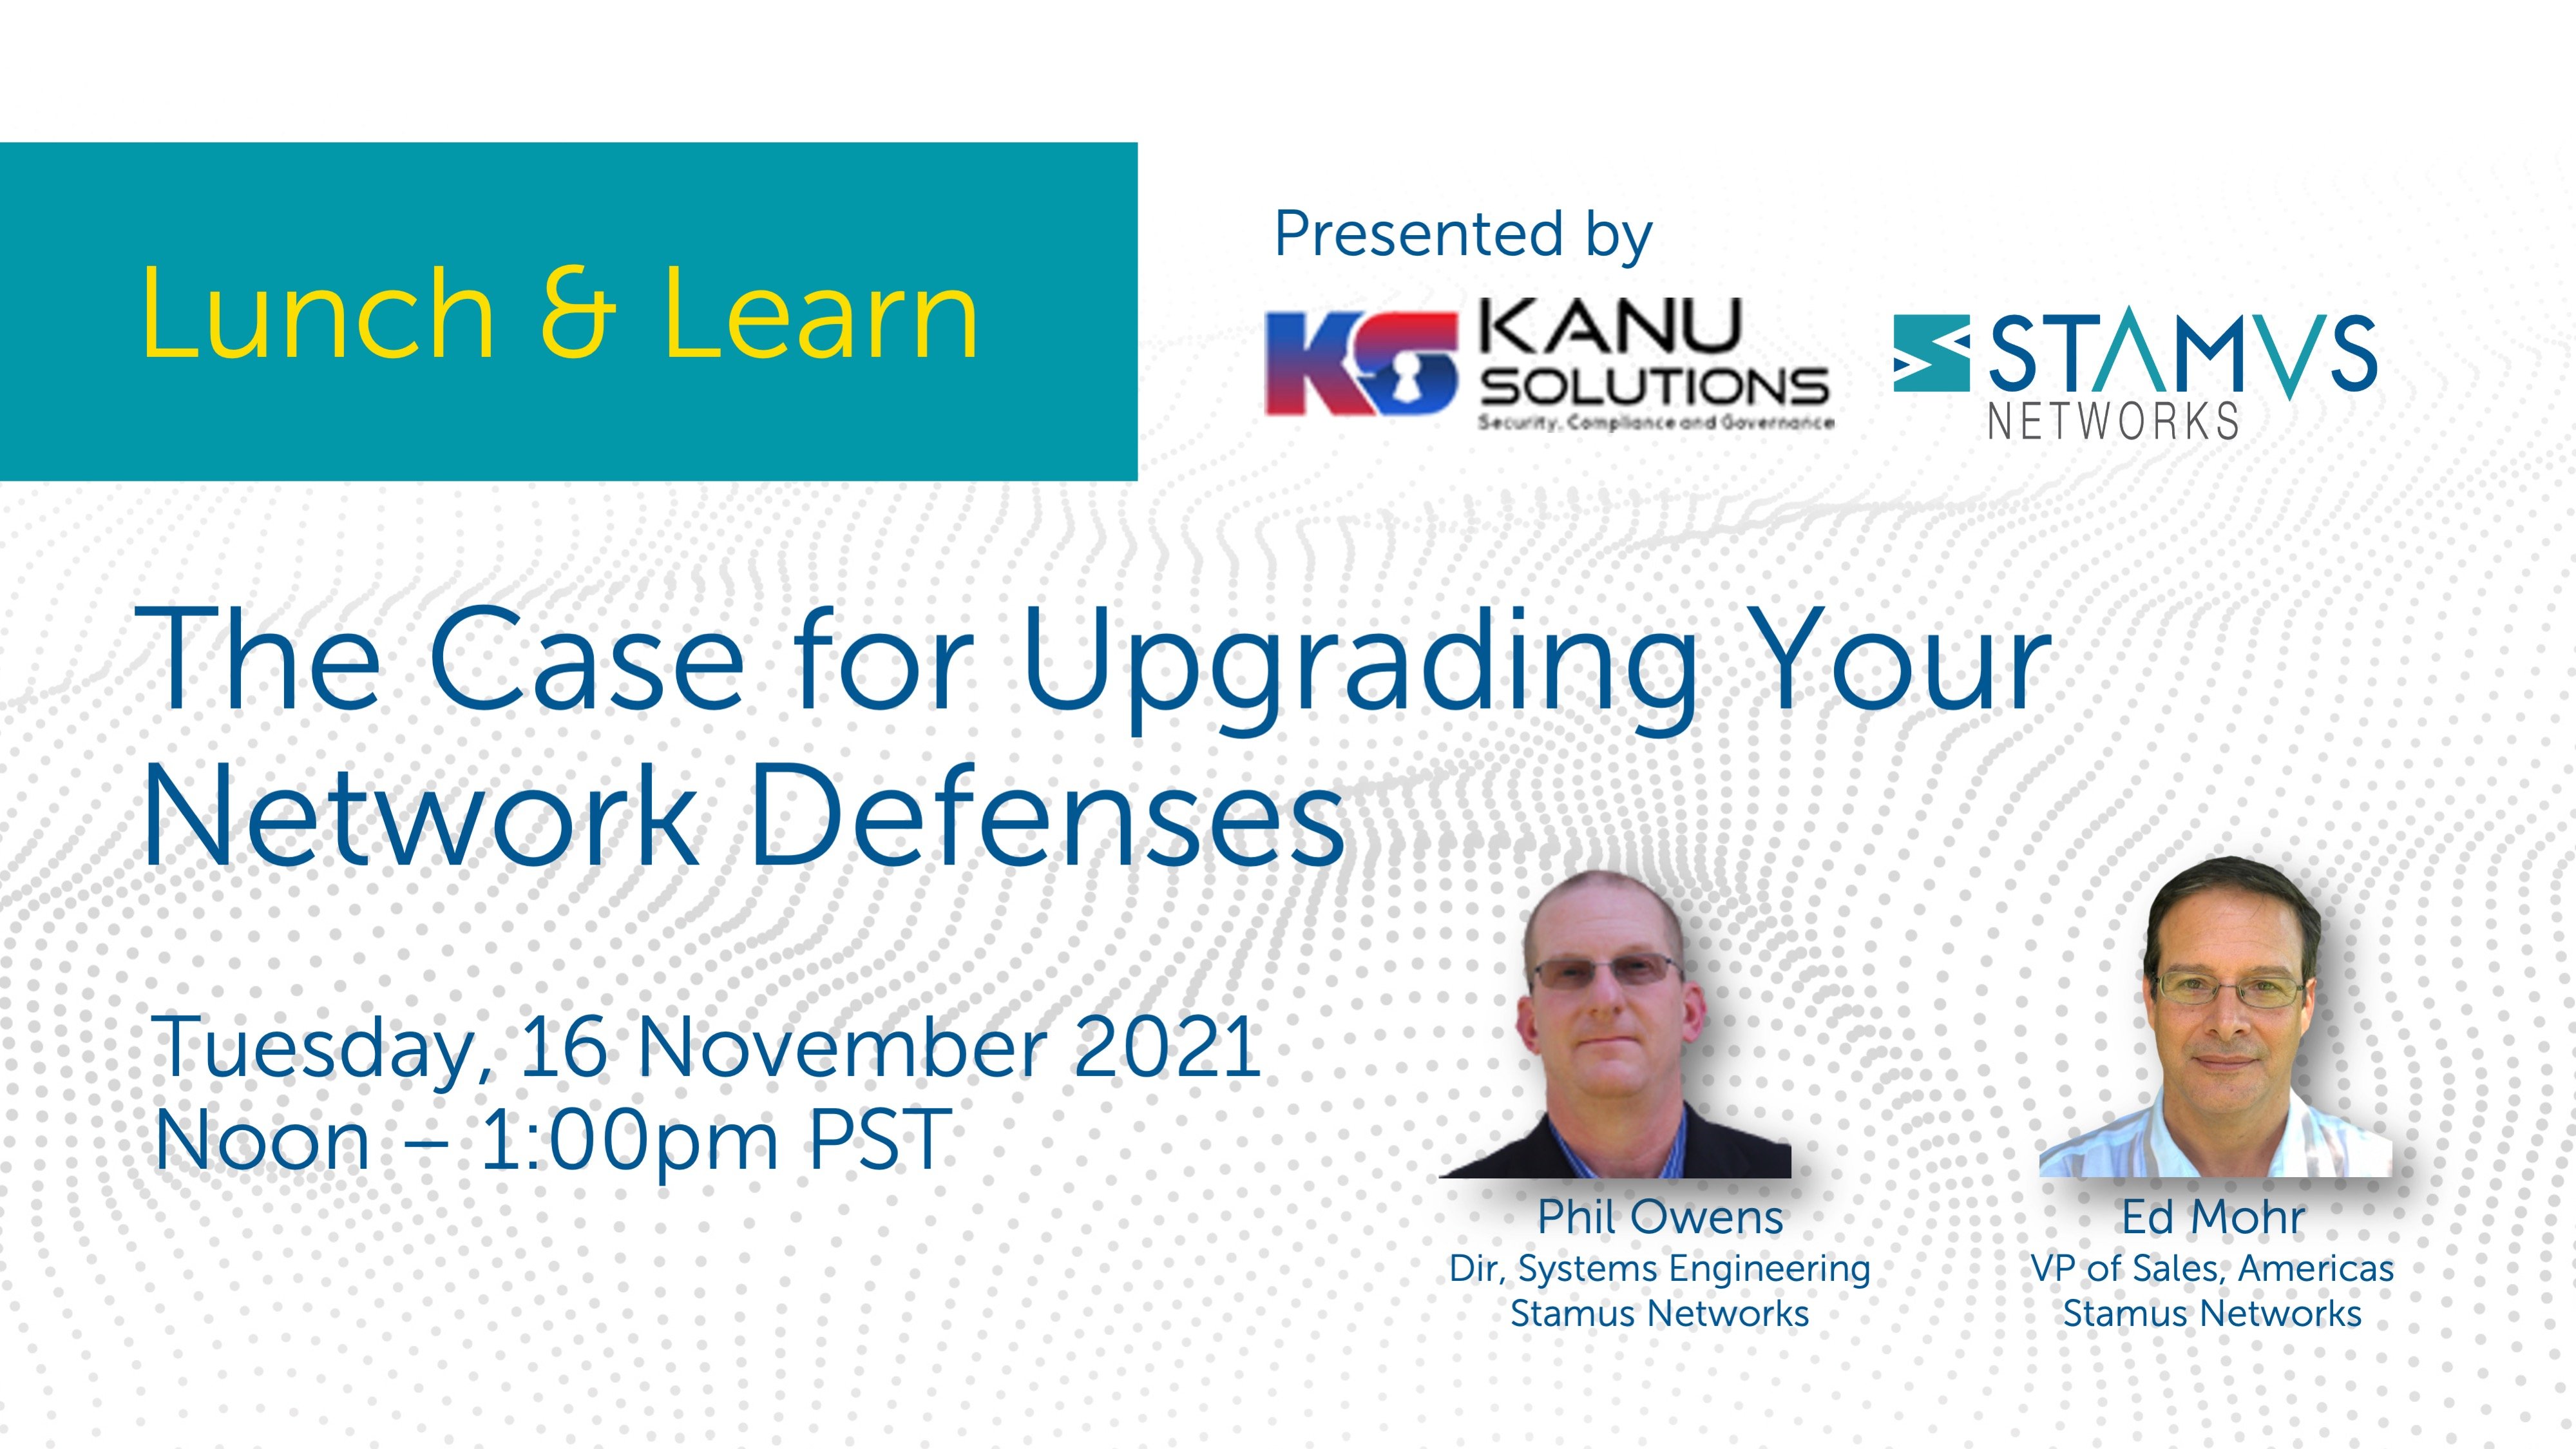 Webinar 2: The Case for Upgrading Your Network Defenses